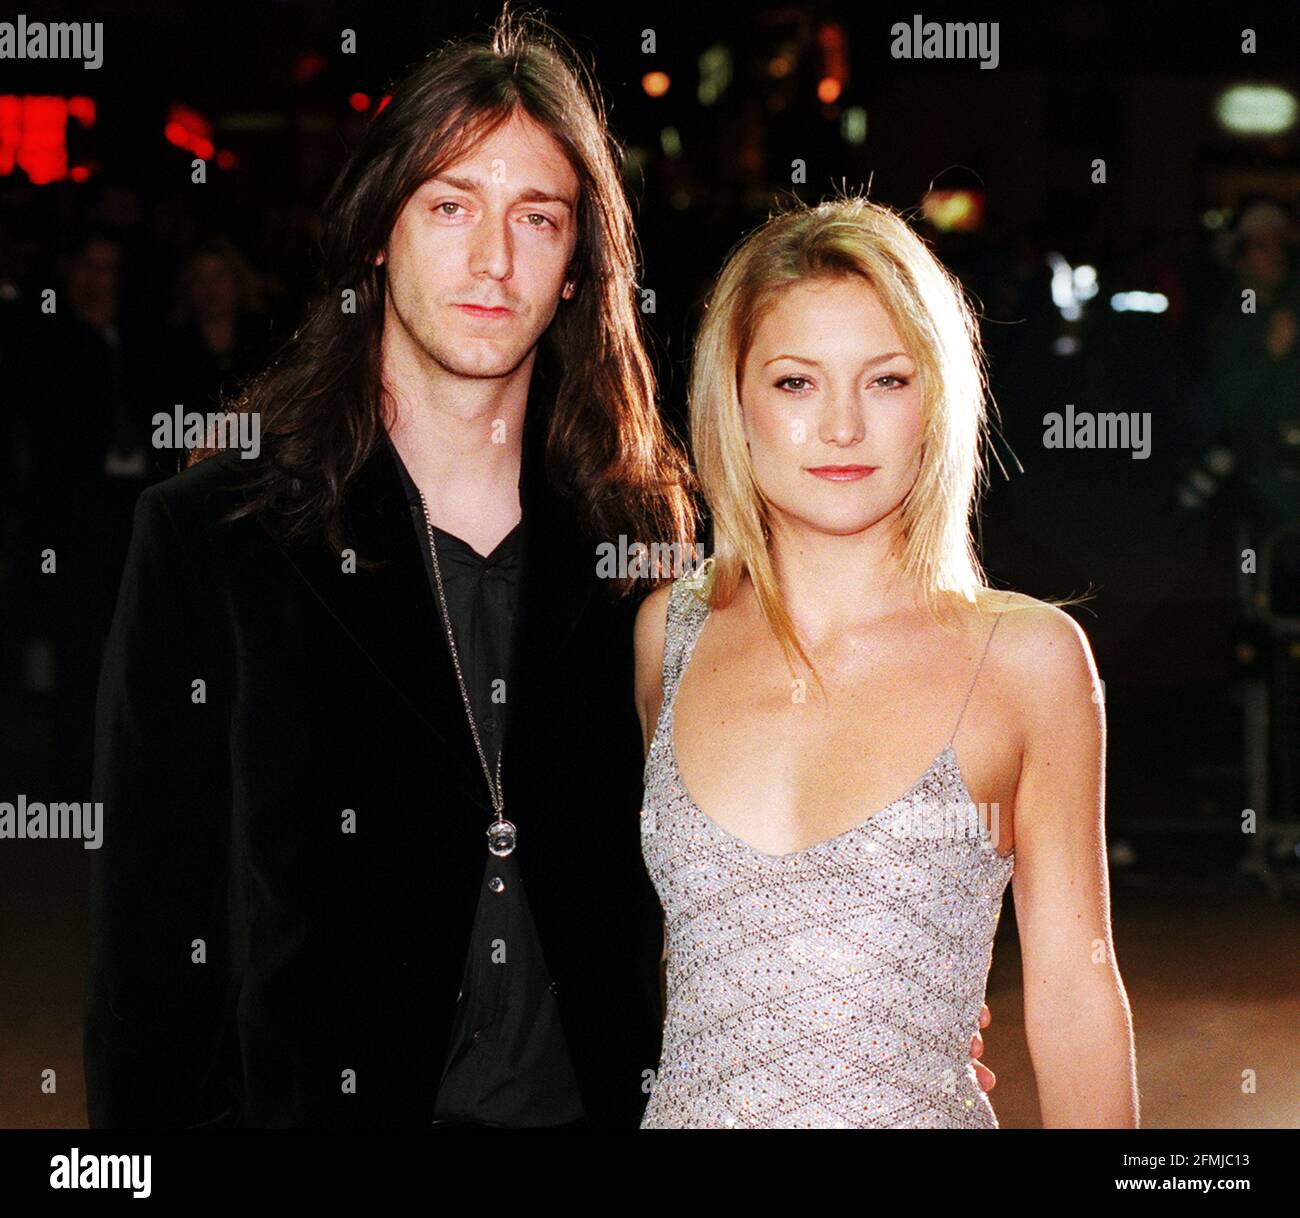 *** LEGAL WARNING - KATE HUDSON MADE LEGAL COMPLAINT AGAINST ARTICLES SUGGESTING SHE HAS EATING DISORDER. CONTACT LEGAL DEPARTMENT. 8 November 2005*** KATE HUDSON  NOVEMBER 2000 ACTRESS OF THE FILM 'ALMOST FAMOUS' ARRIVING AT THE PREMIERE AT LEICESTER SQ. THIS EVENING WITH HER ROCK BOYFRIEND CHRIS ROBINSON FROM THE BLACK CROWES Stock Photo